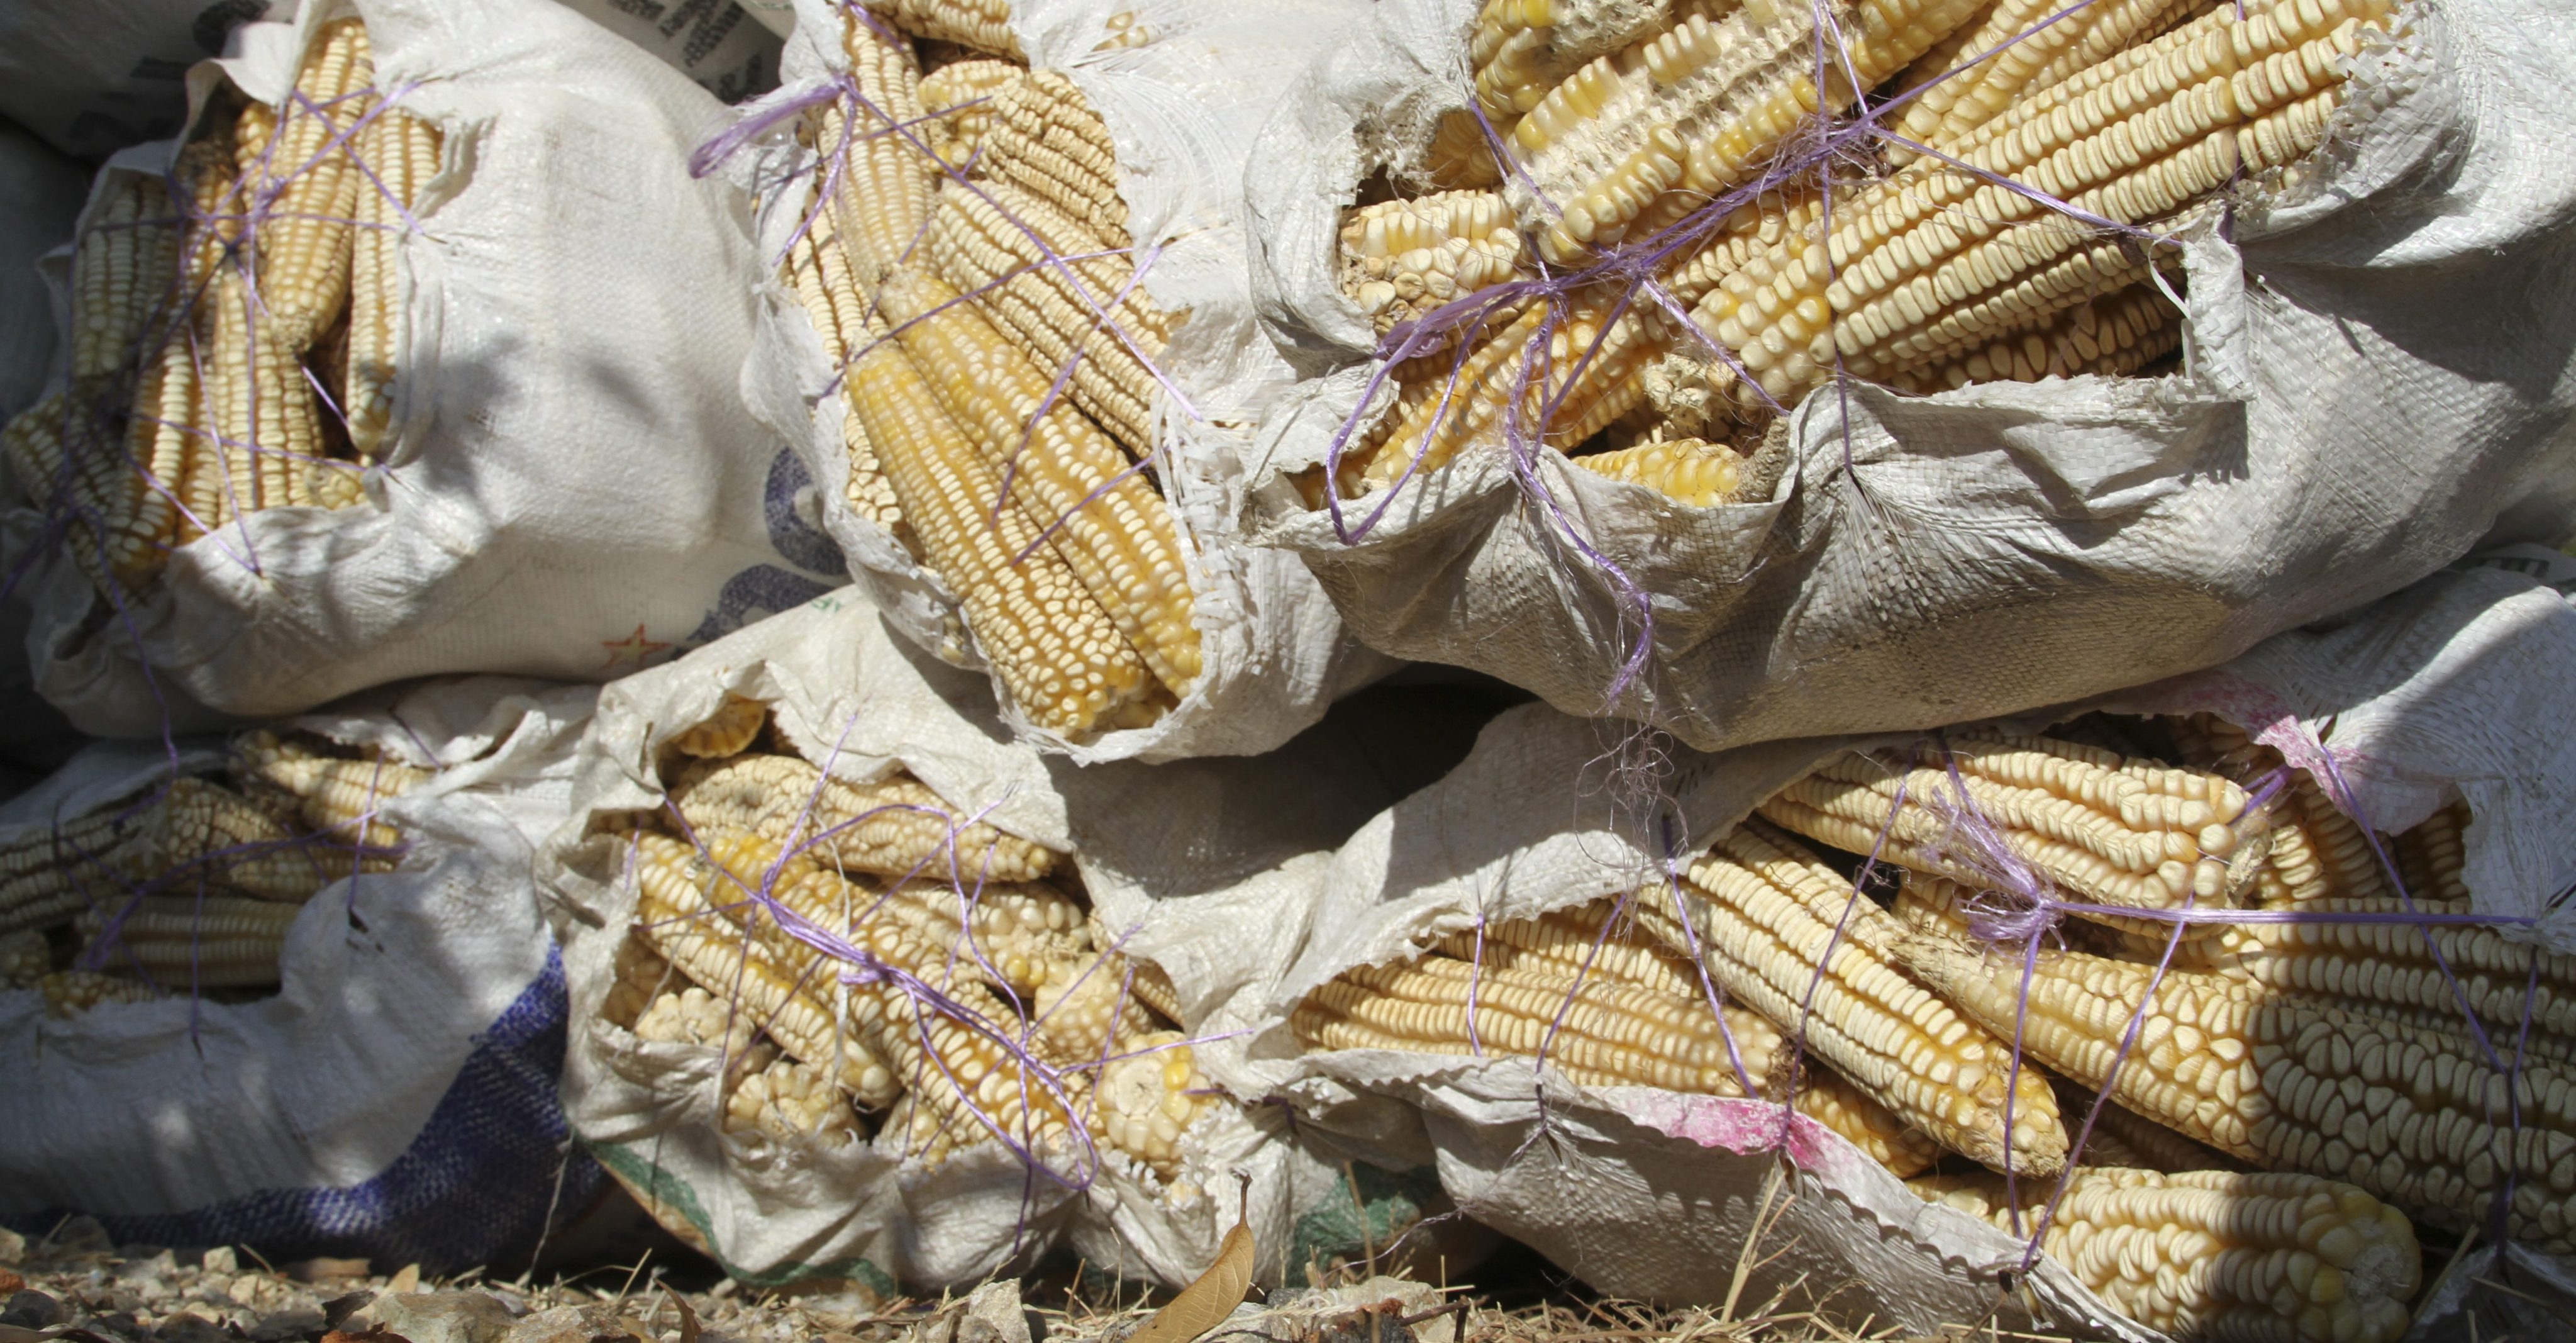 Who has the rights to indigenous maize?